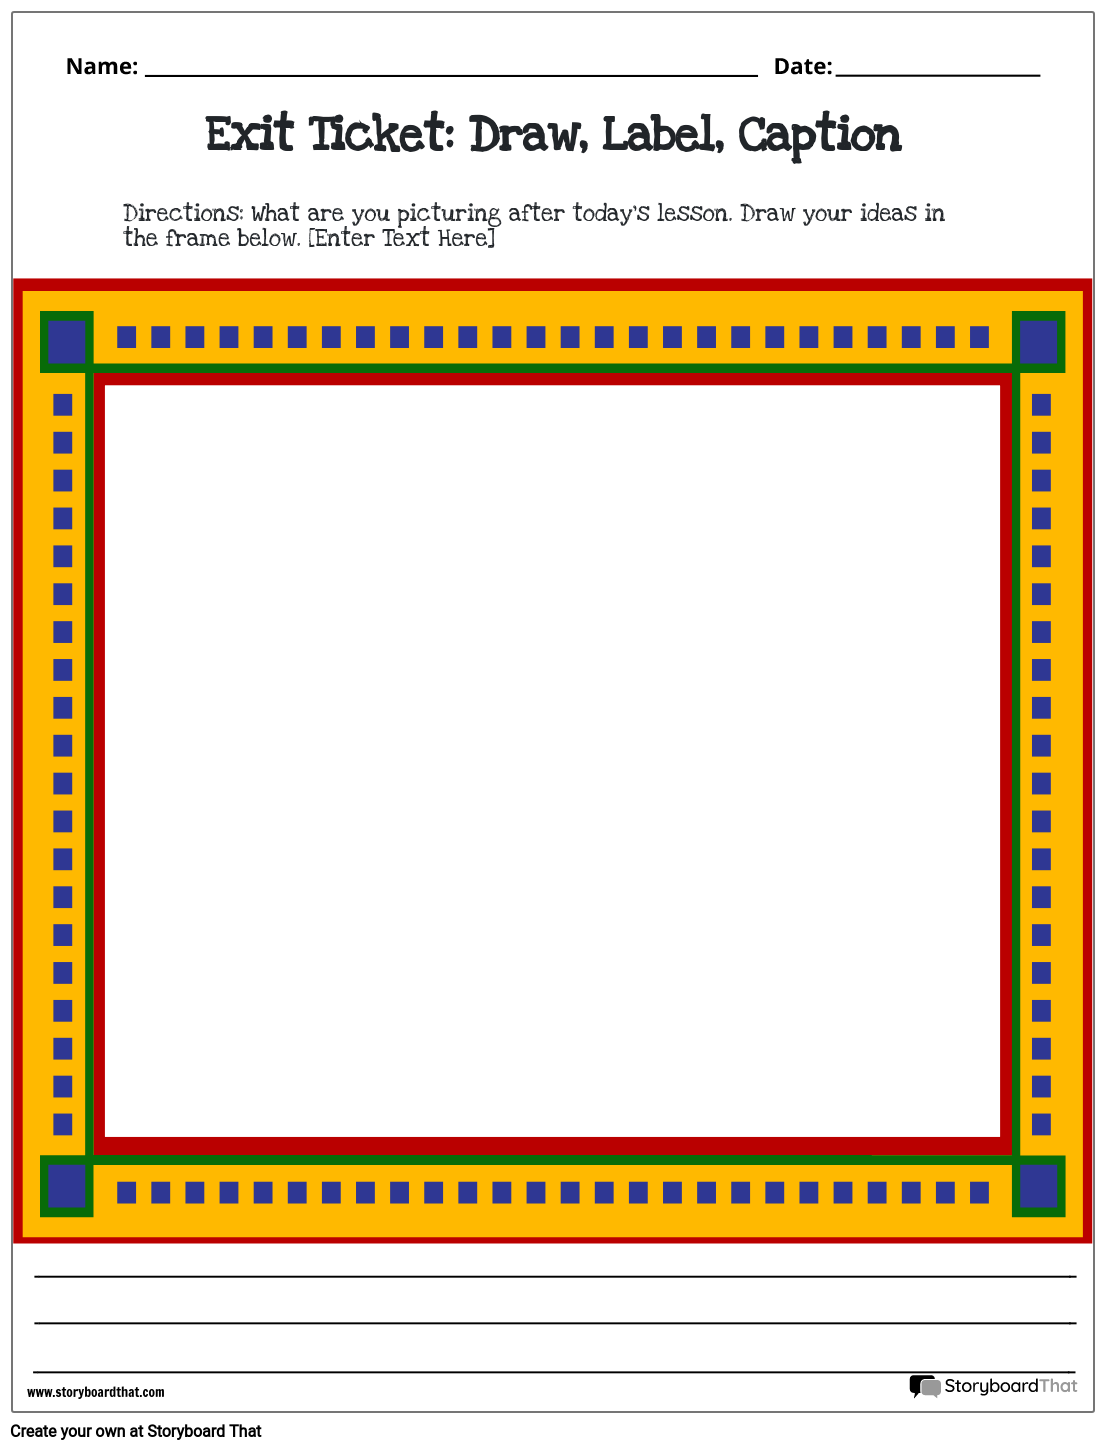 Drawing and Descriptive Printable Exit Ticket Template